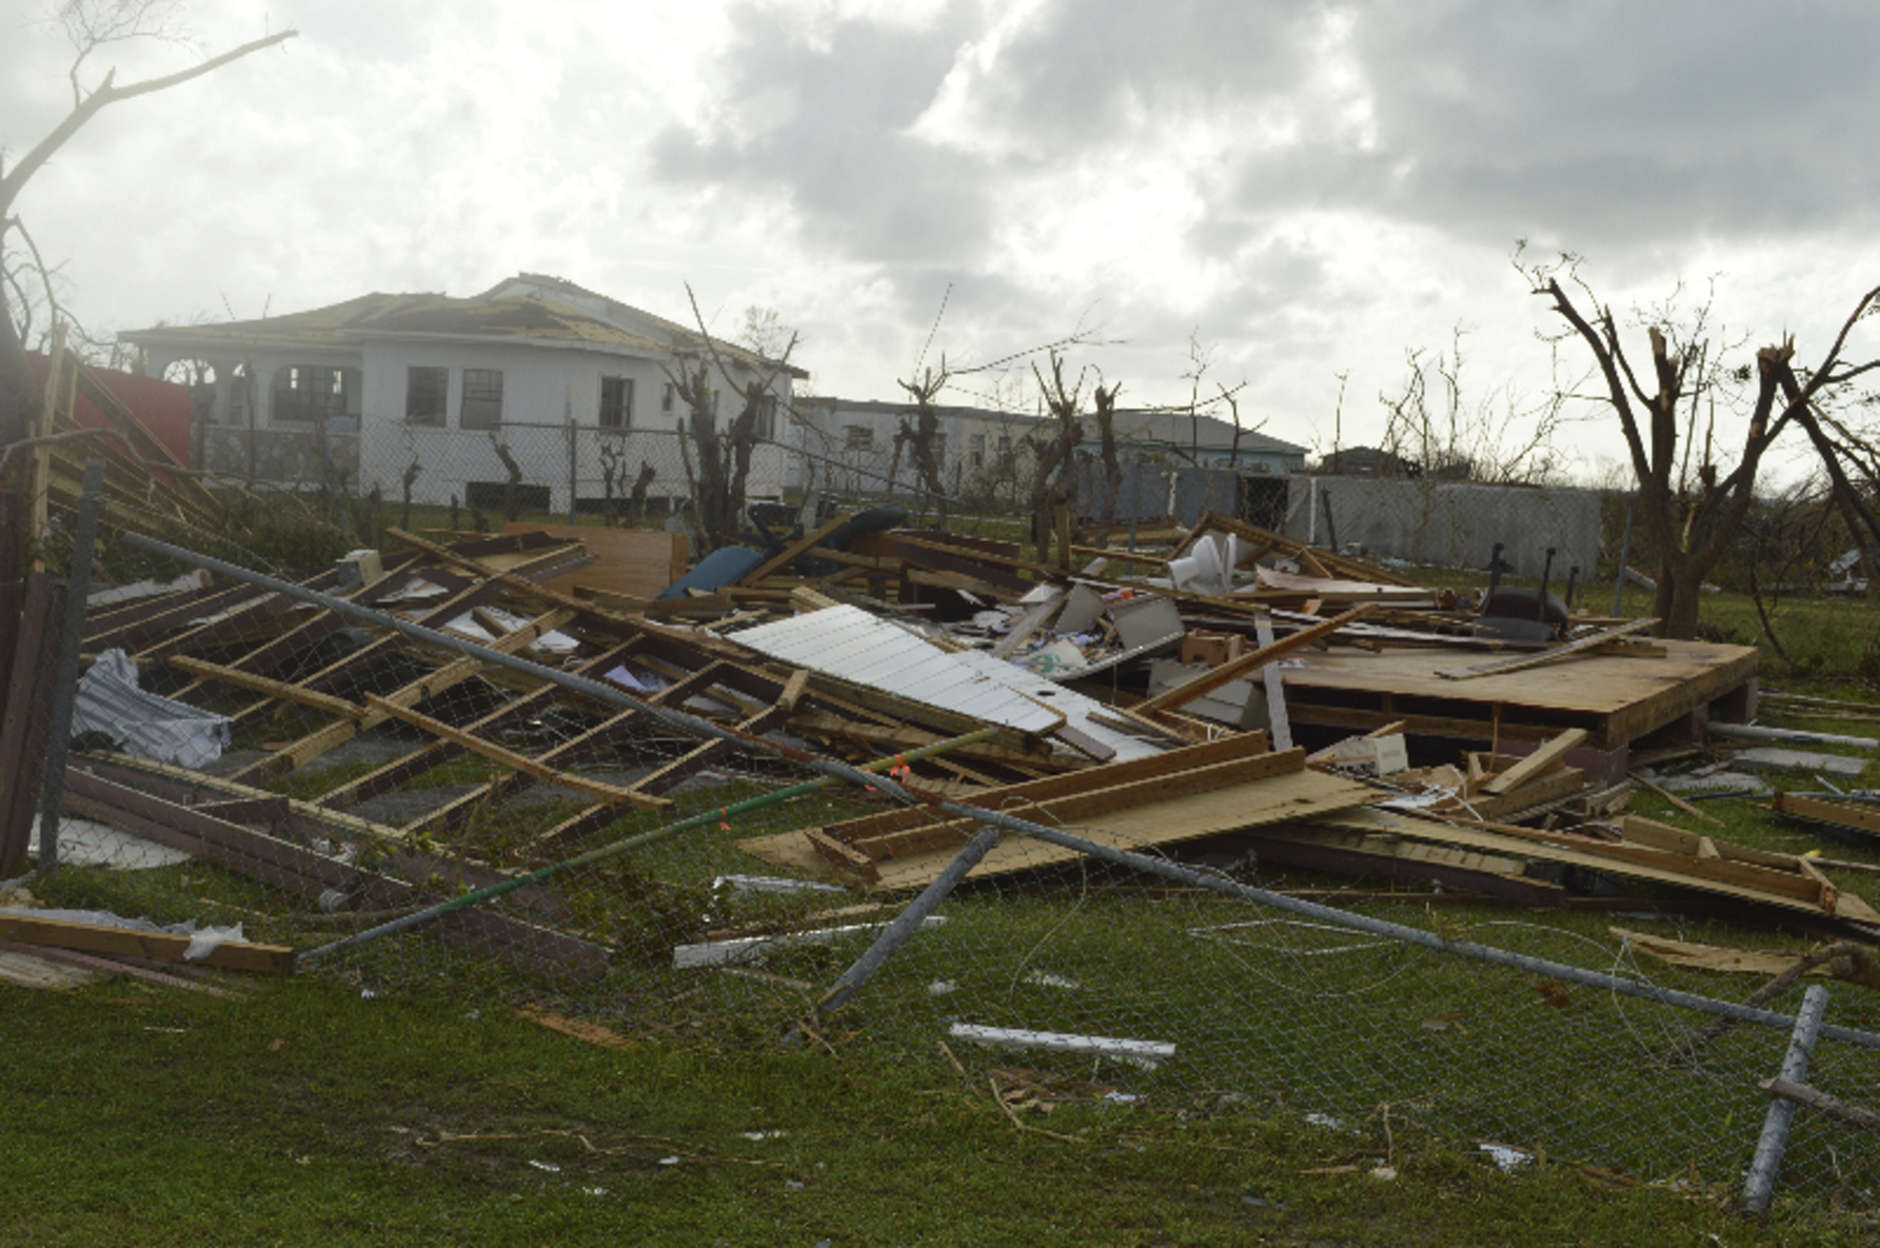 In this Thursday, Sept. 7, 2017, photo, damage is left after Hurricane Irma hit Barbuda. Hurricane Irma battered the Turks and Caicos Islands early Friday as the fearsome Category 5 storm continued a rampage through the Caribbean that has killed a number of people, with Florida in its sights. (AP Photo/Anika E. Kentish)